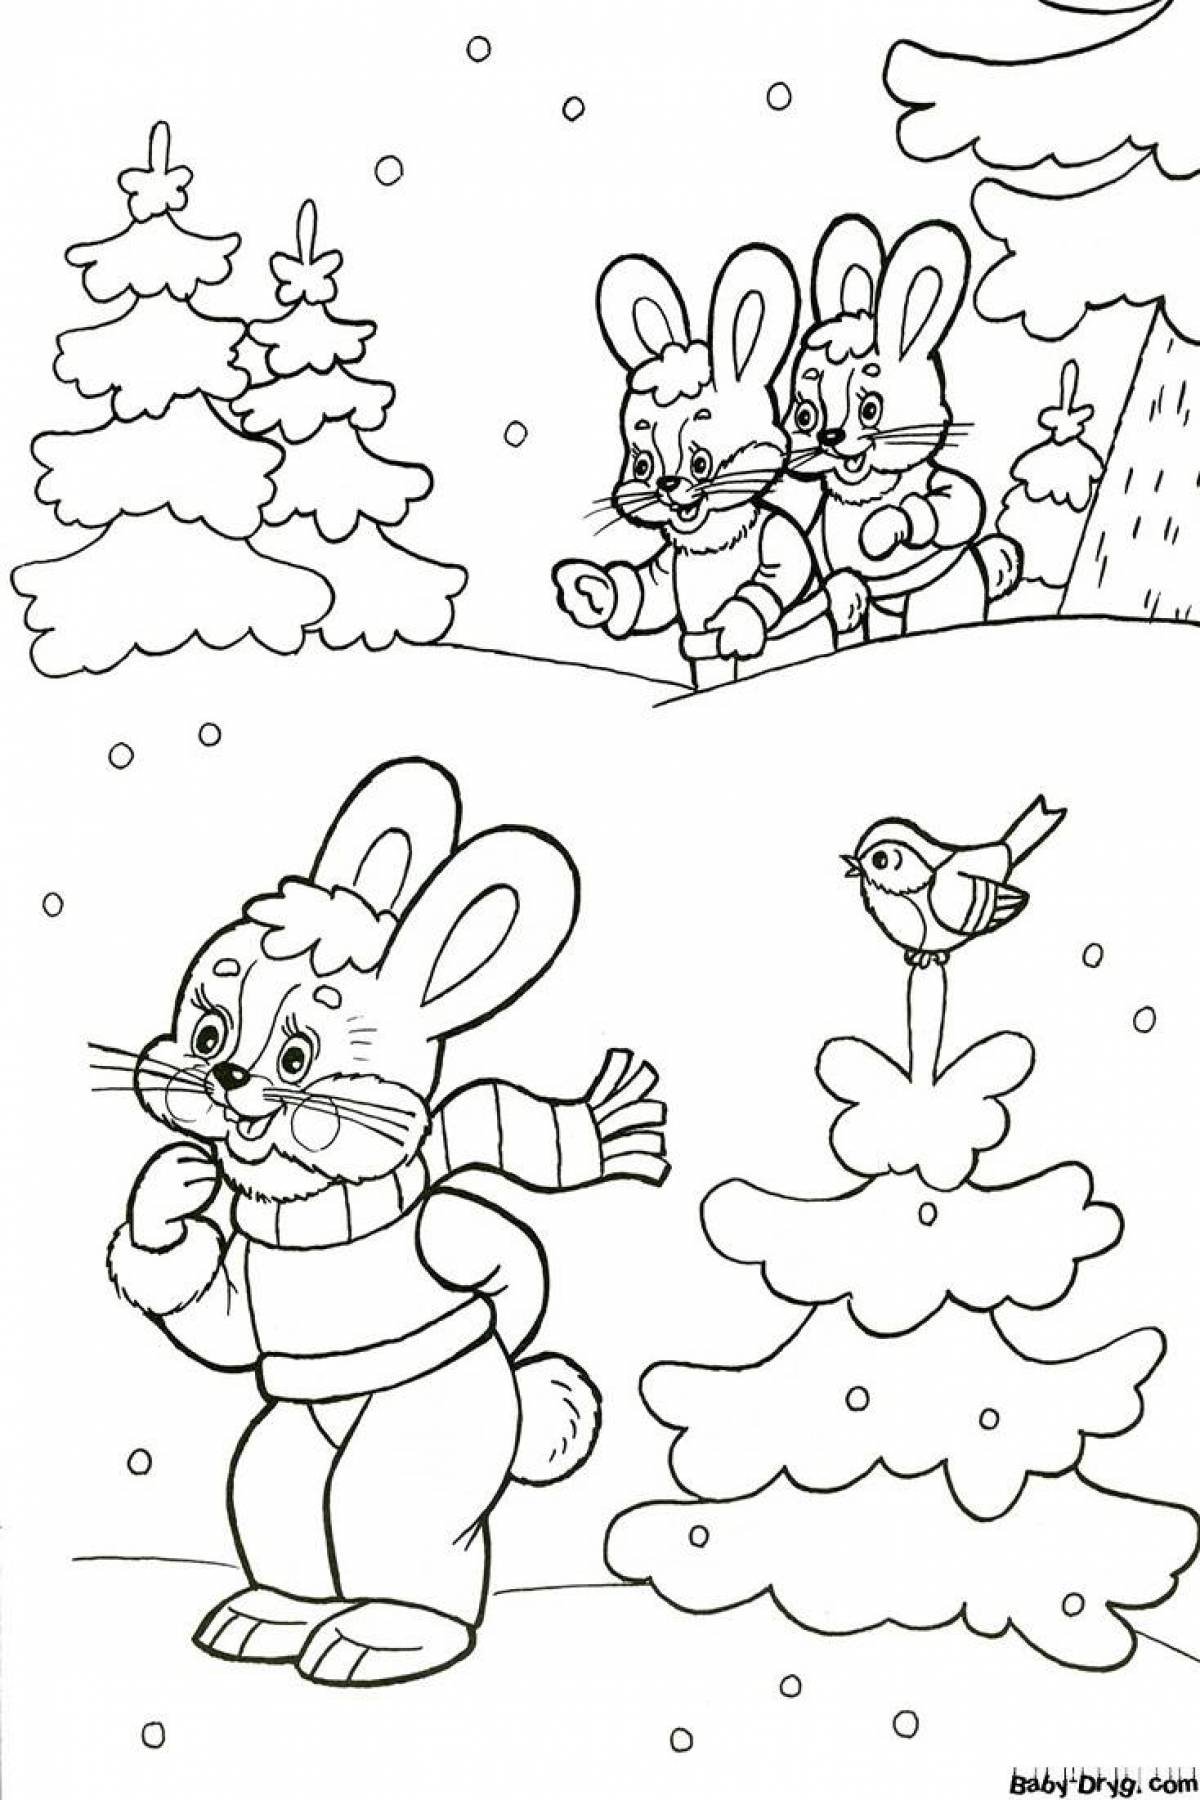 Serene winter coloring book for 10 year olds